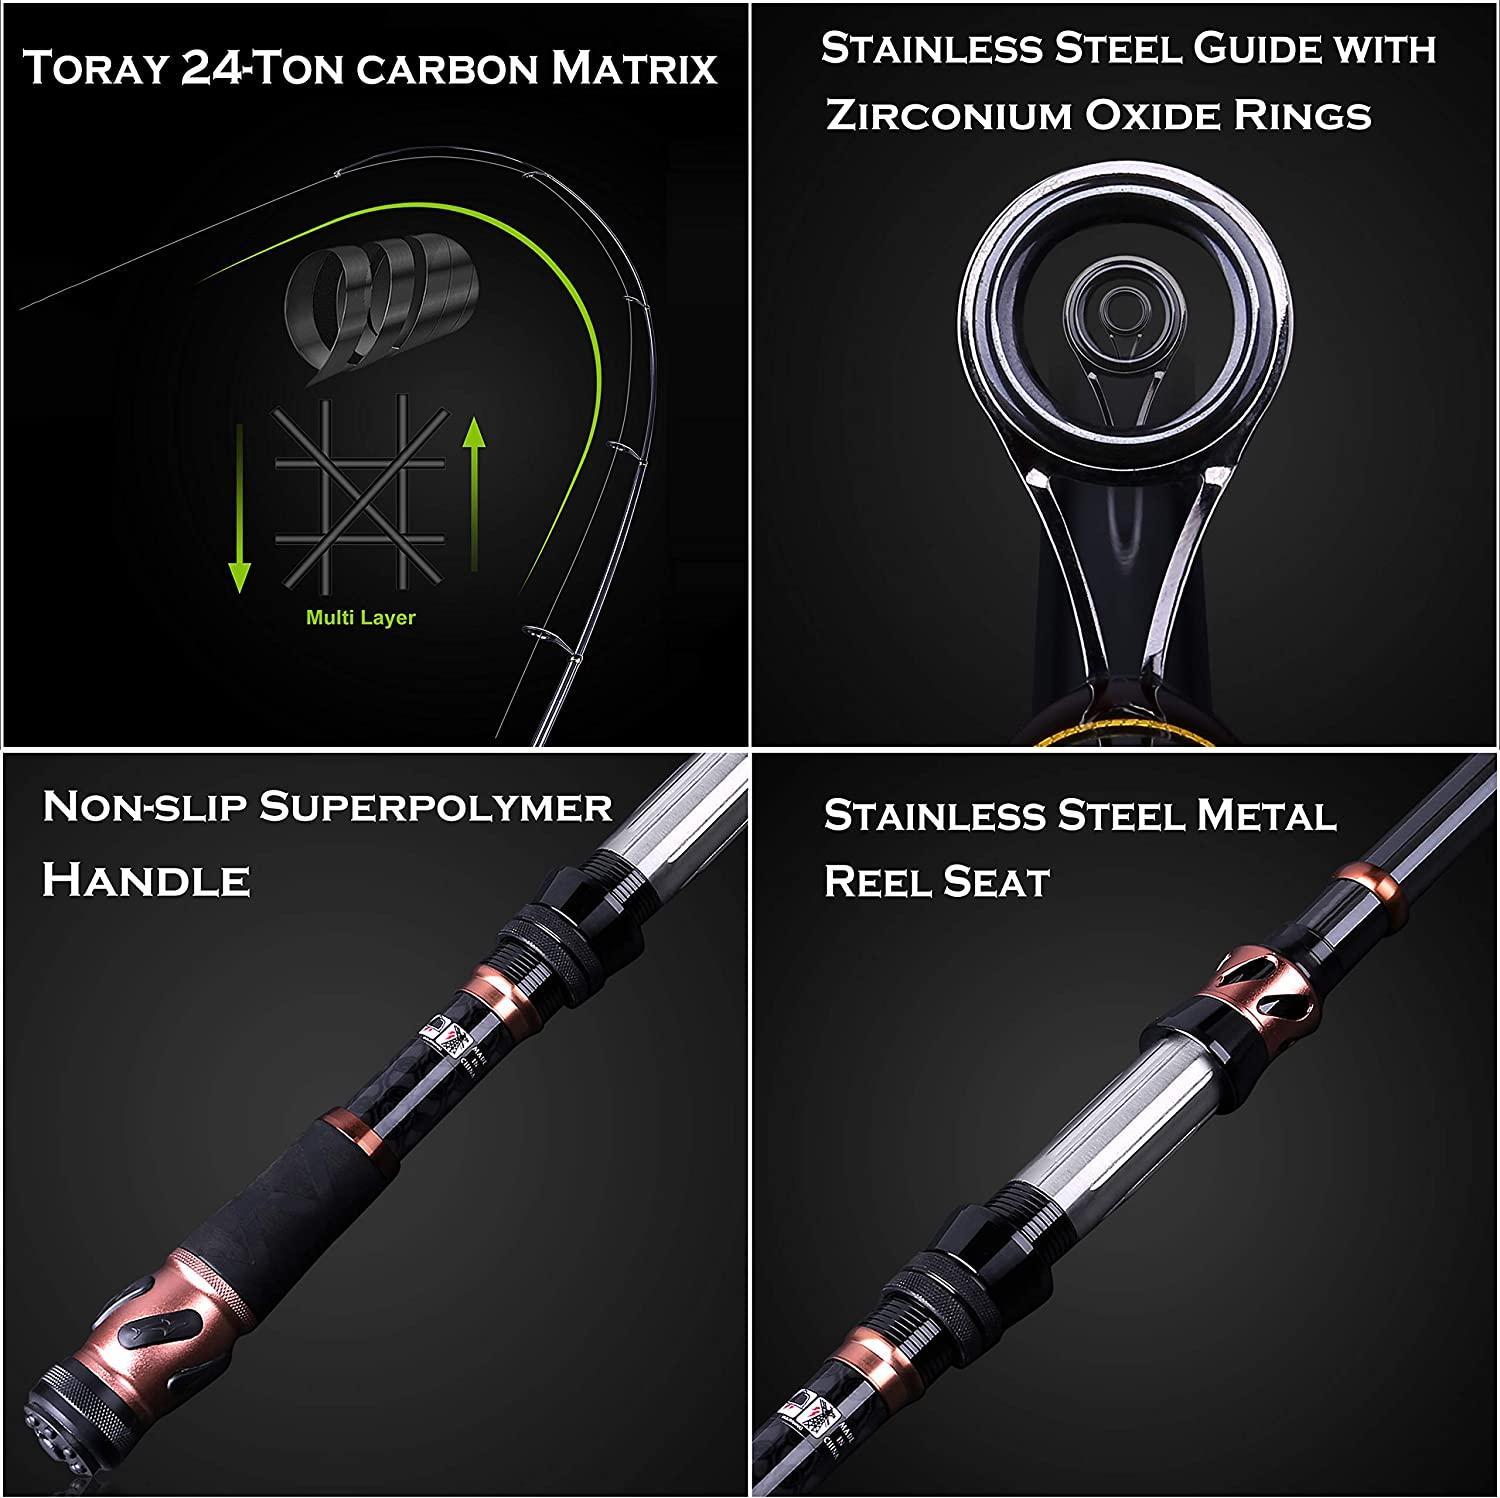 PLUSINNO Fishing Rod and Reel Combos - Carbon Fiber Telescopic Fishing Pole  - Spinning Reel 12 +1 Shielded Bearings Stainless Steel BB, Fishing 